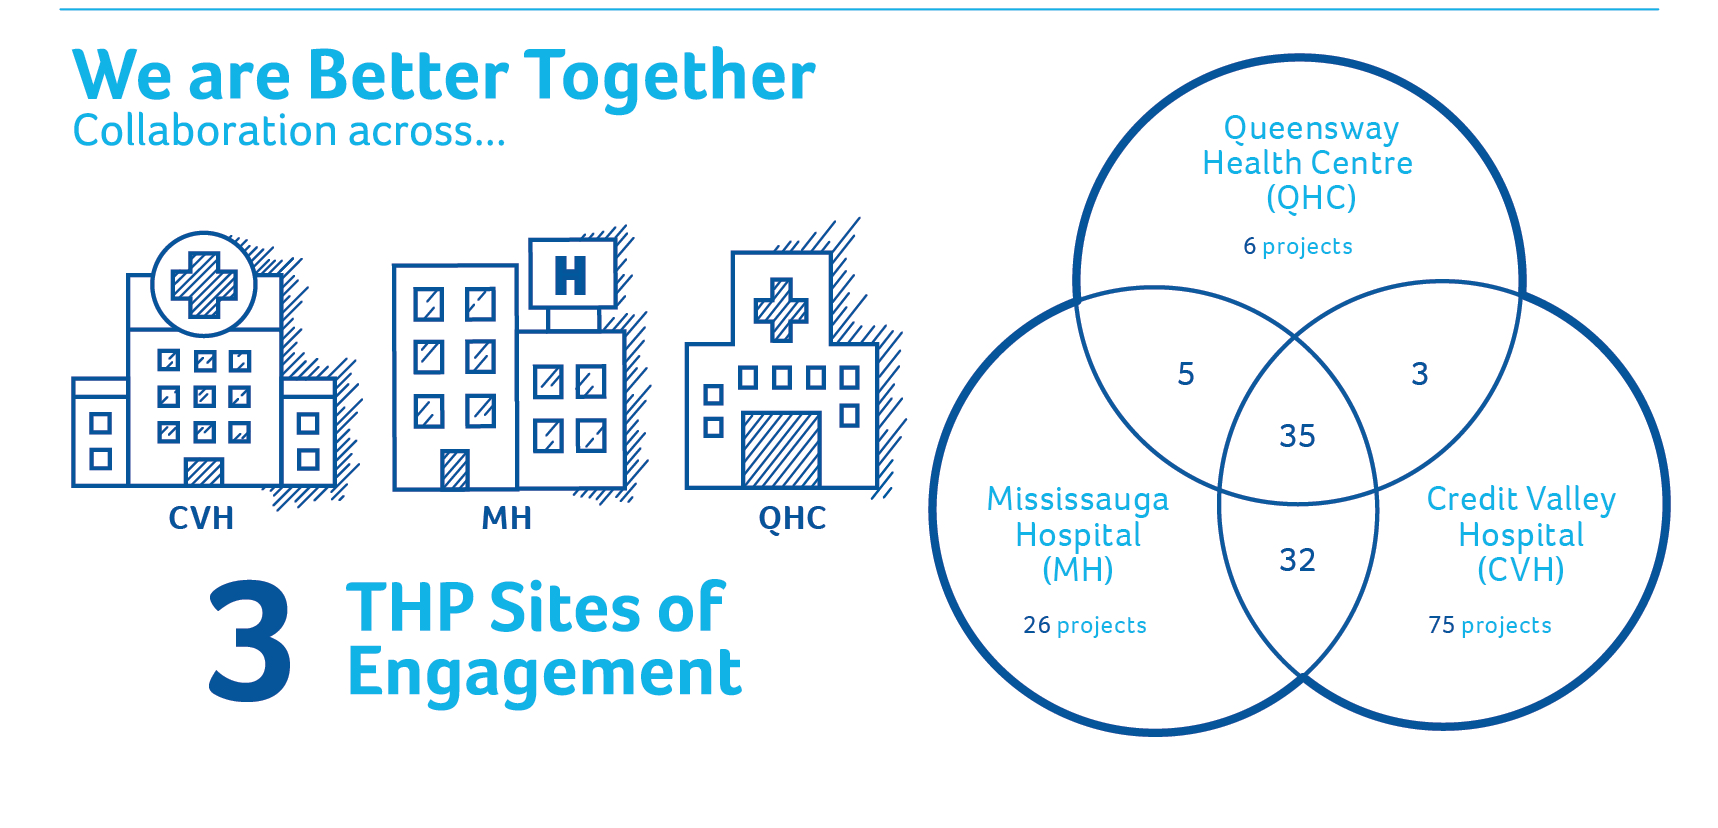 3 Sites of Engagement: Mississauga Hospital: 25 Projects, Credit Valley Hospital: 71 projects, Queensway Health Centre: 3 Projects.